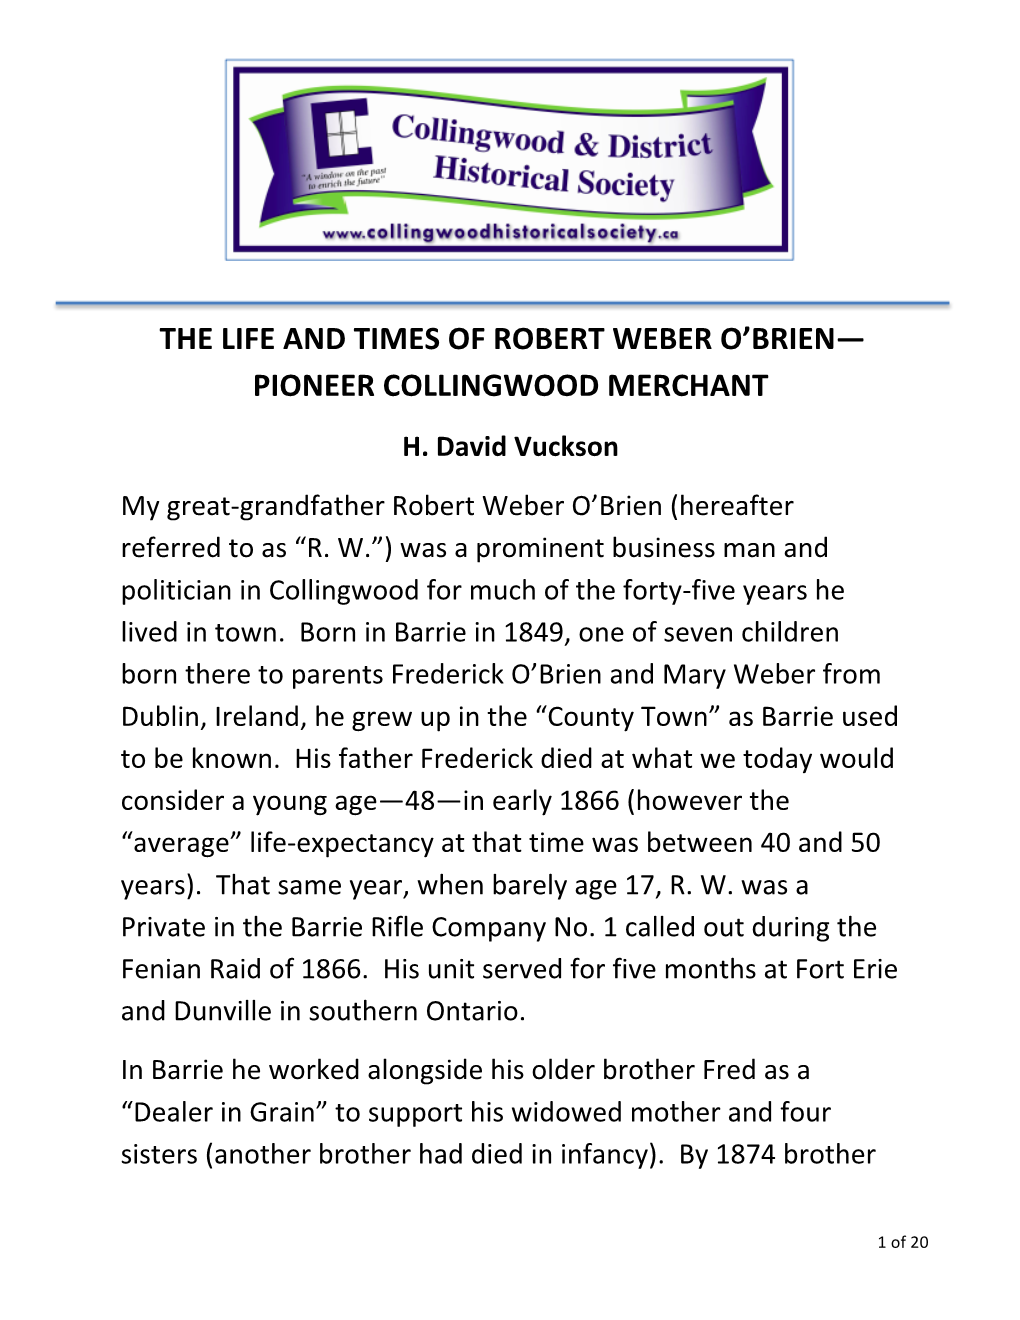 The Life and Times of Robert Weber O'brien